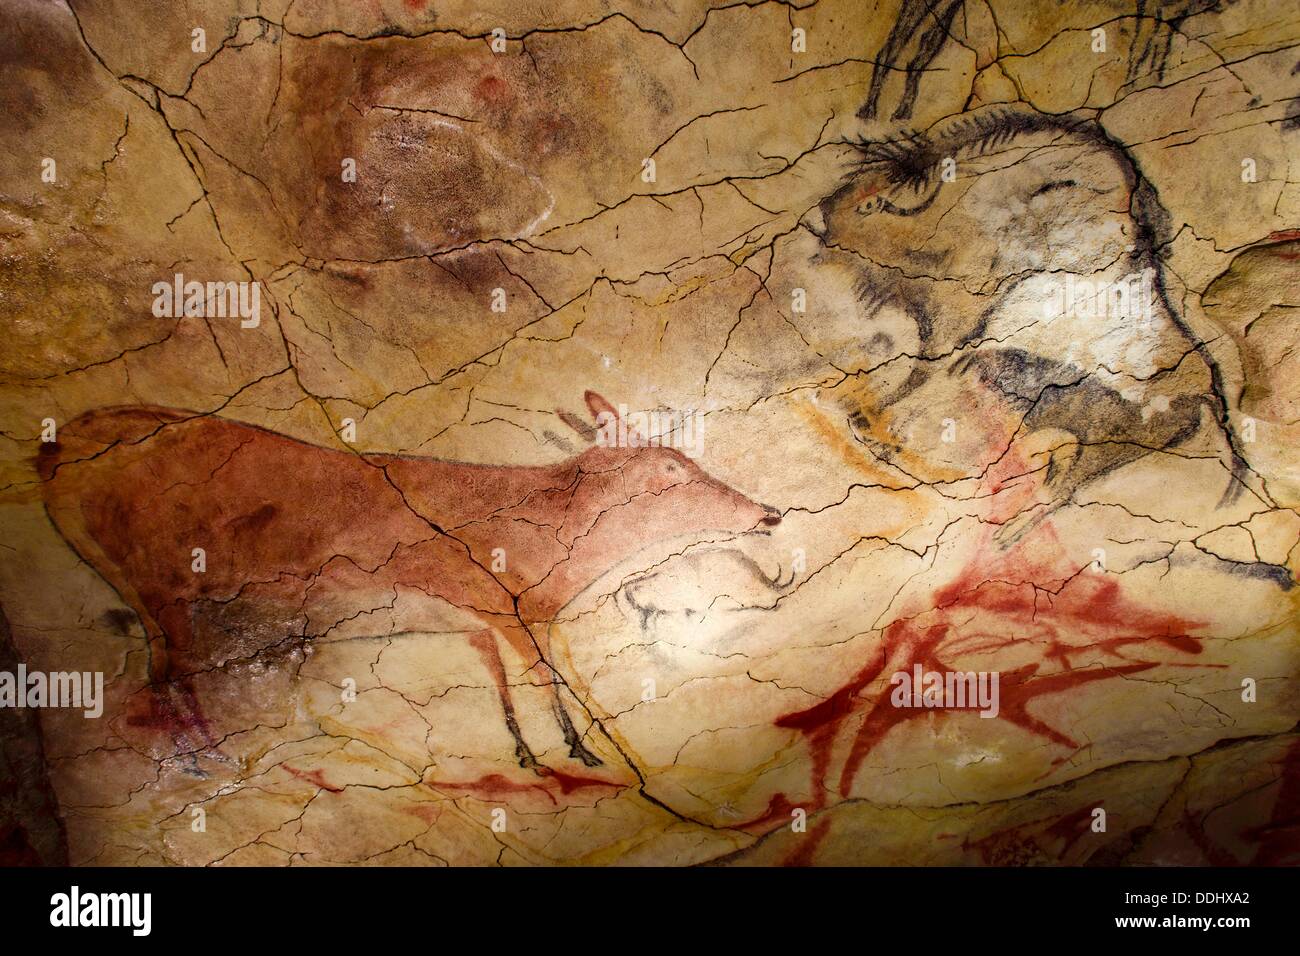 https://c8.alamy.com/comp/DDHXA2/deer-and-bison-in-altamiras-reproduction-cave-neo-cave-upper-paleolithic-DDHXA2.jpg